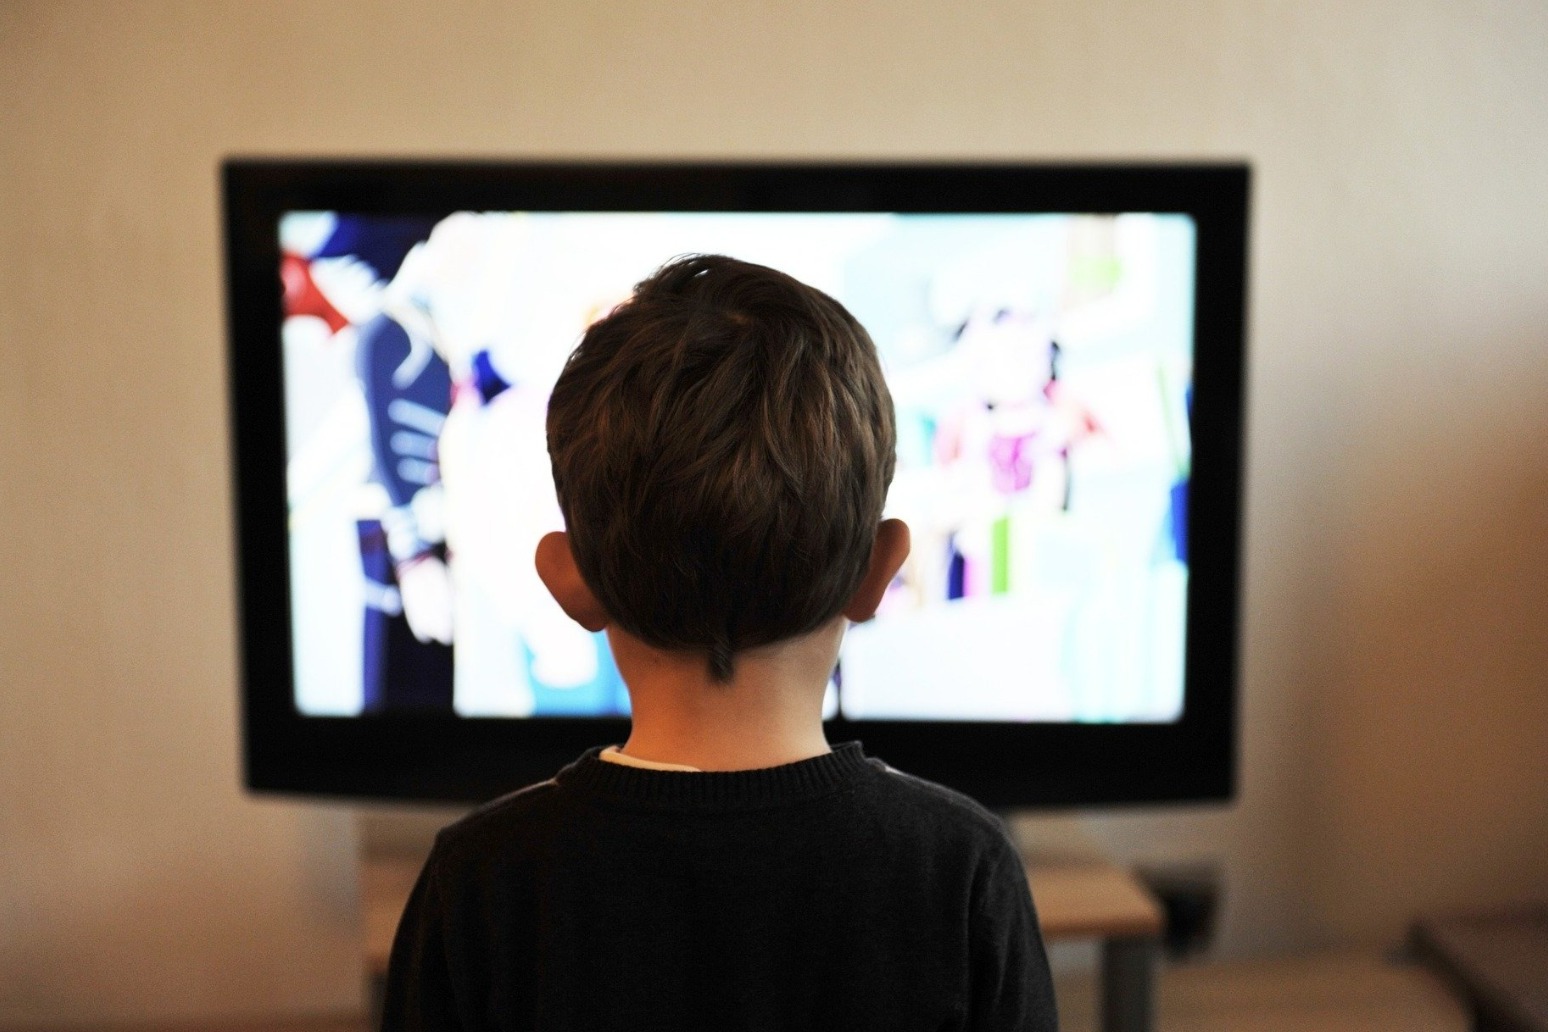 TV screen time and video streaming soar during lockdown, Ofcom says 